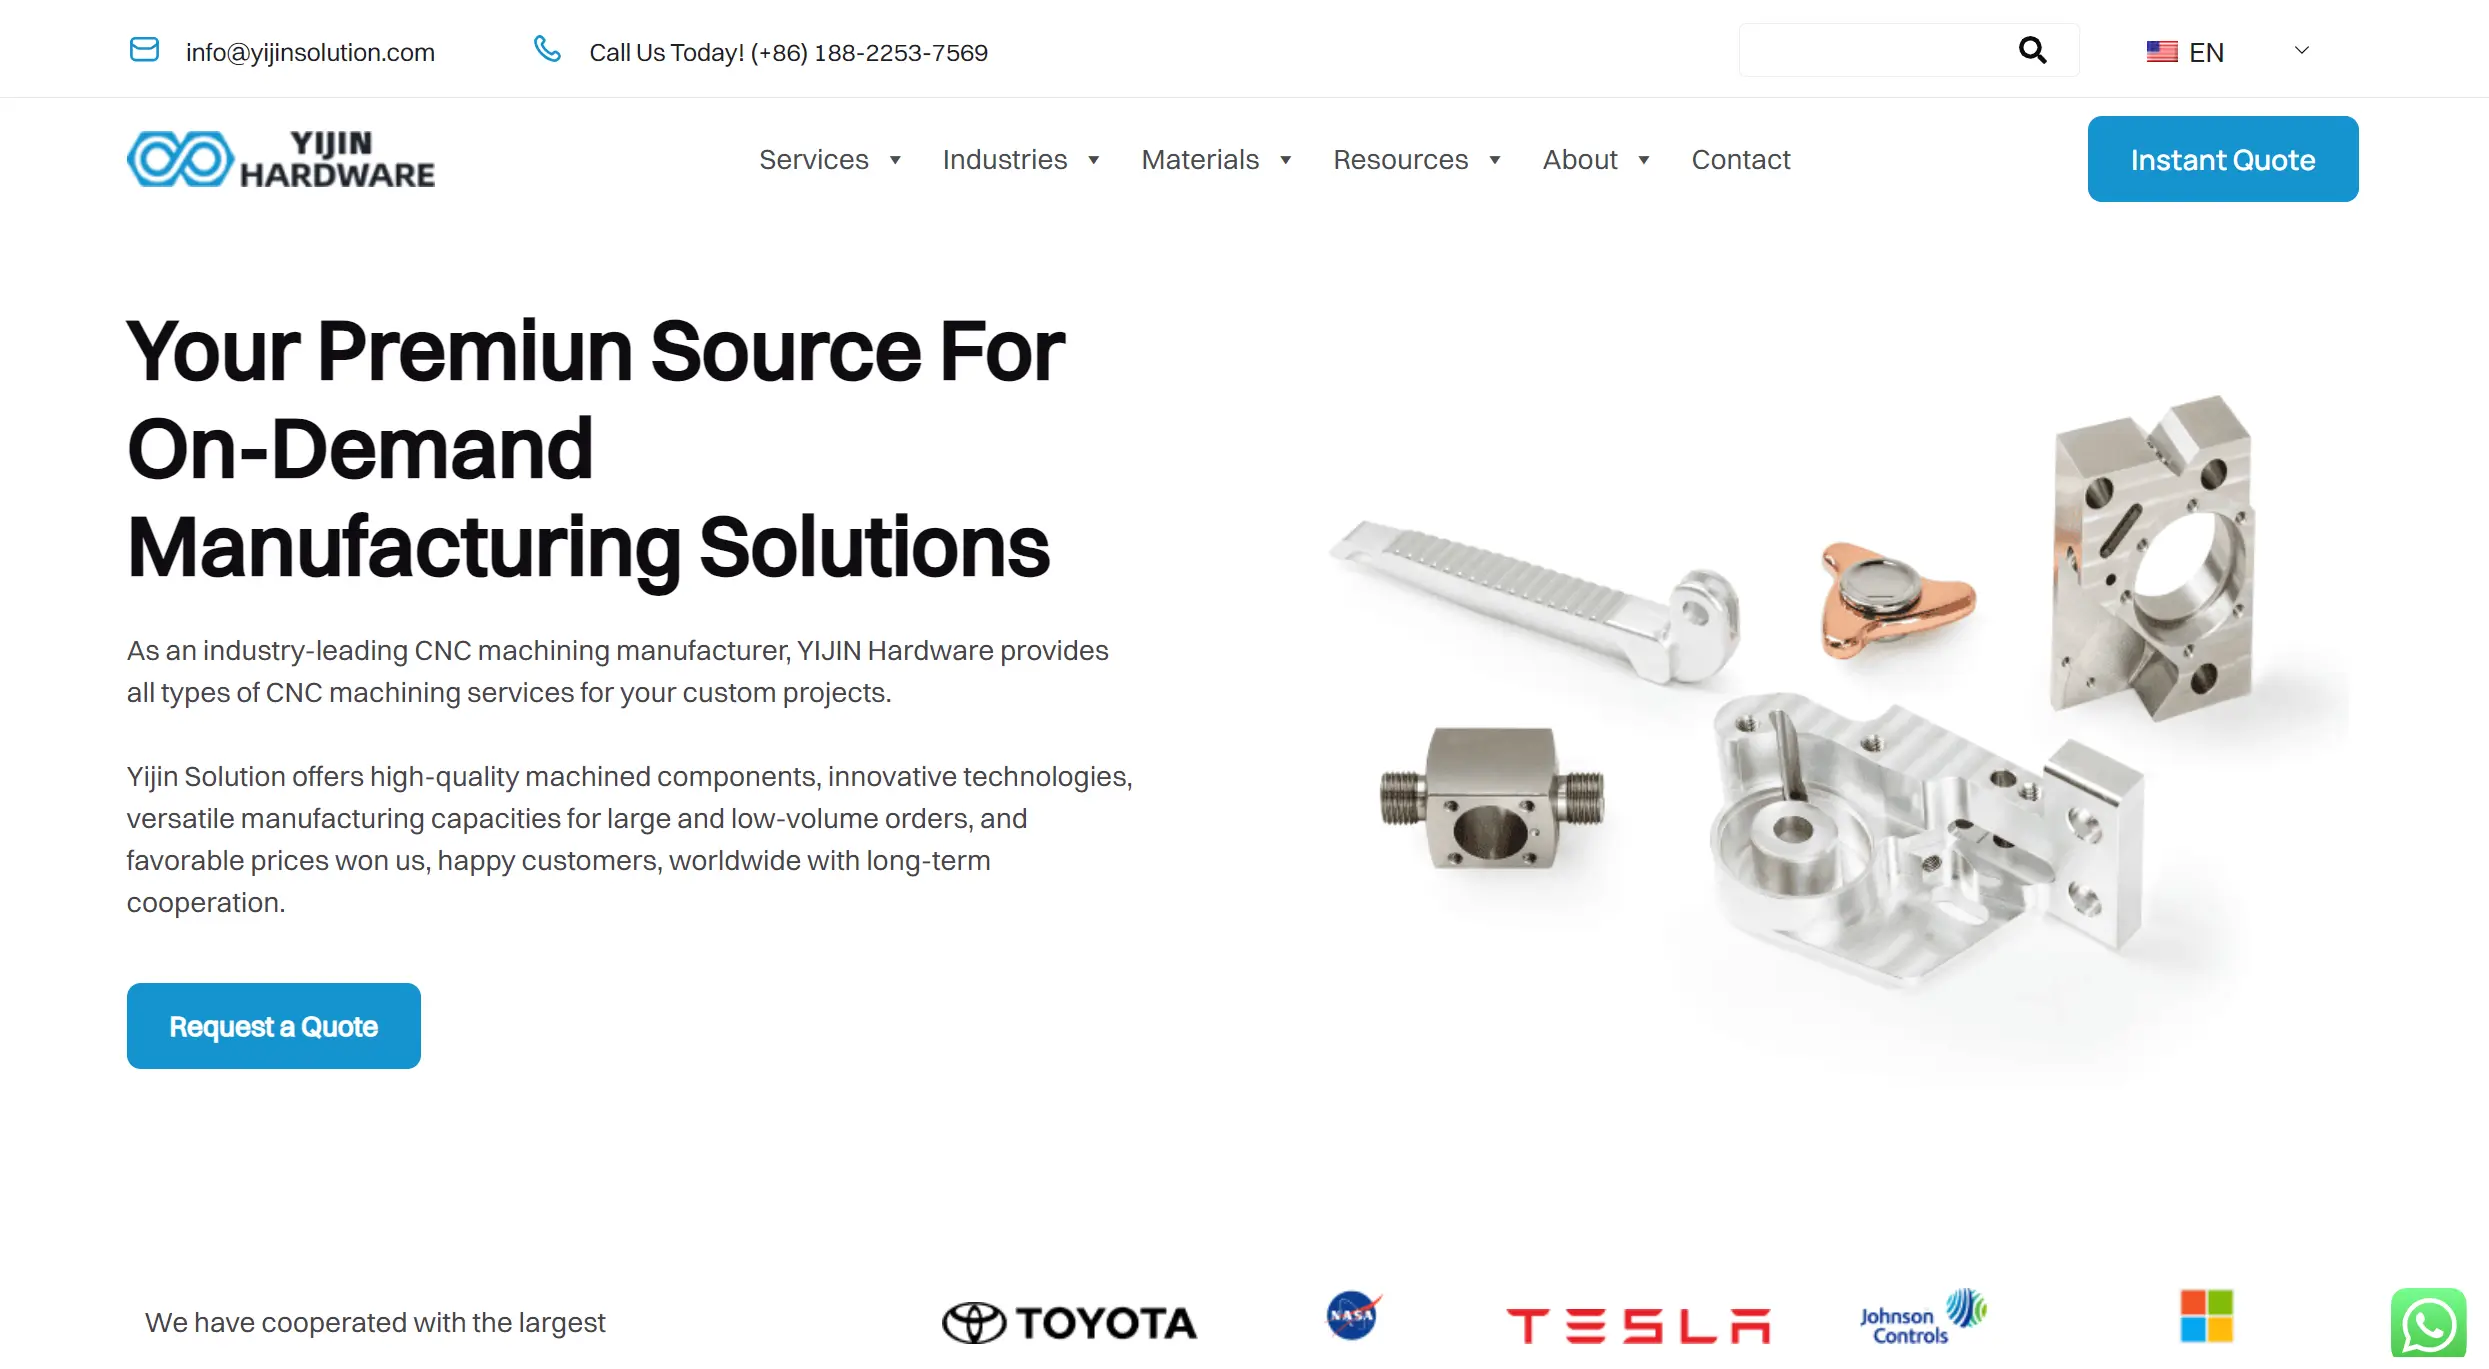 Yijin Hardware: On-demand Manufacturing Solutions